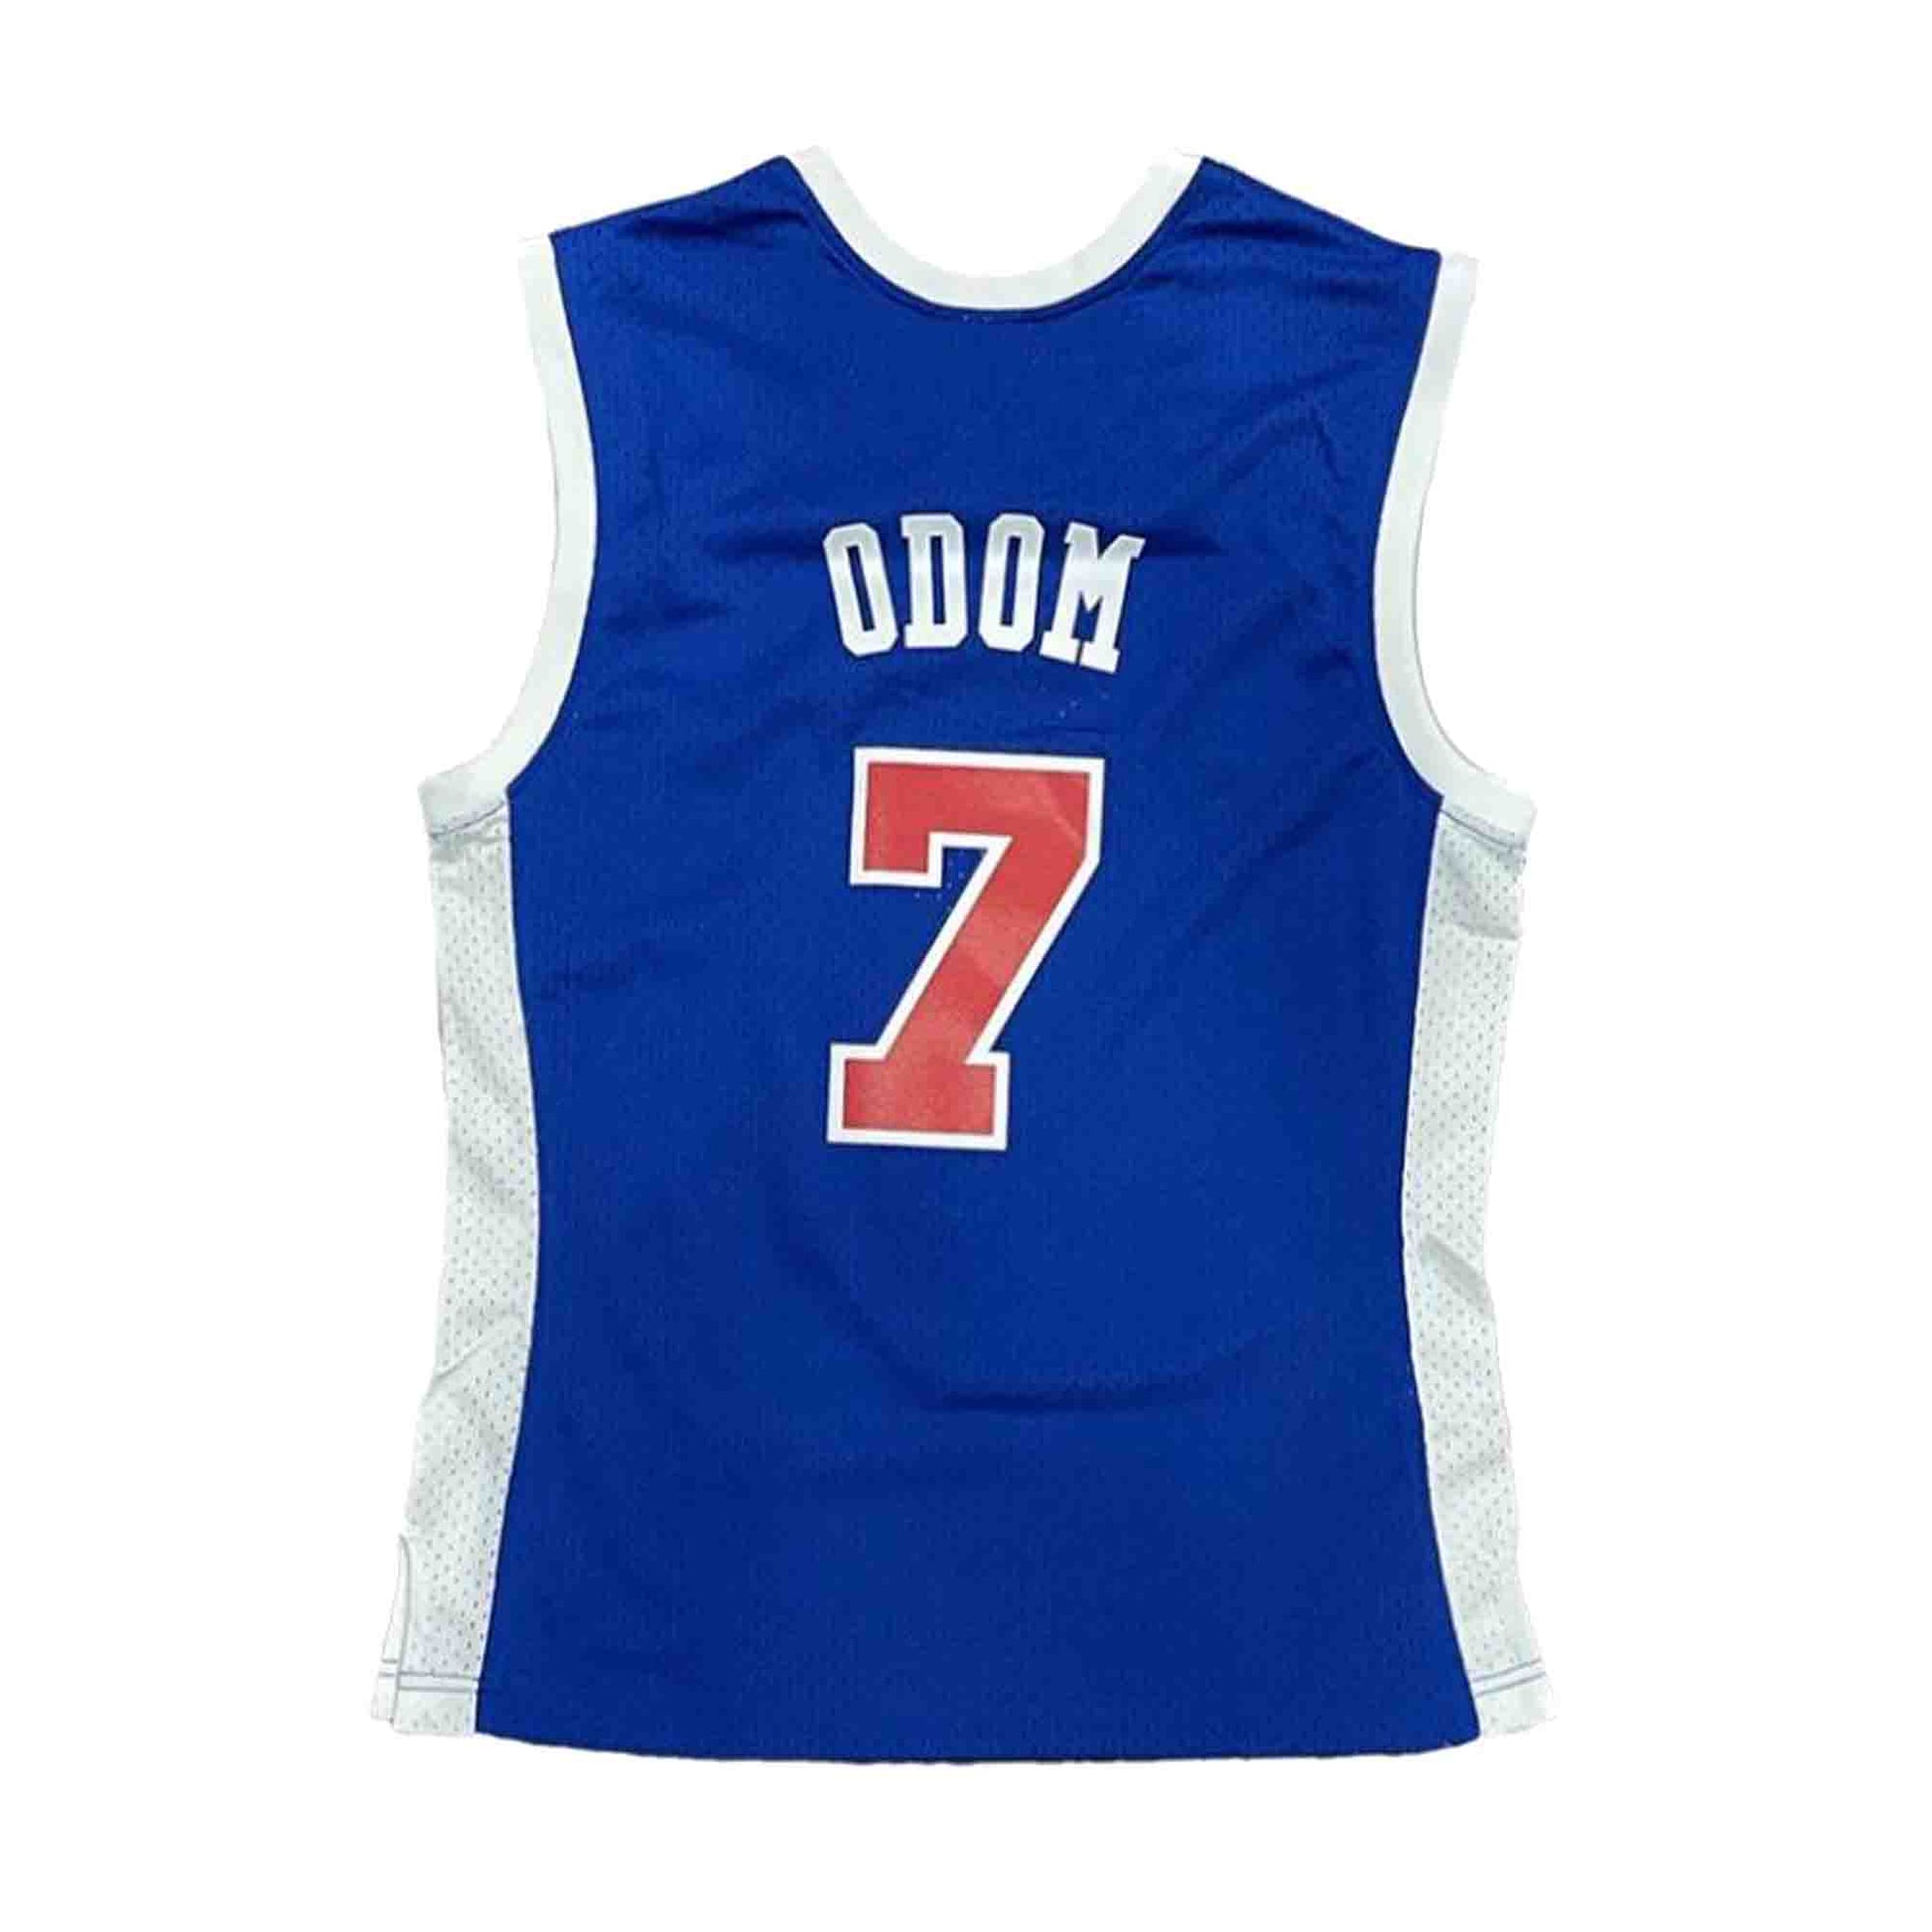 Lamar Odom Signed Los Angeles Clippers Champion NBA Style Jersey (JSA –  Super Sports Center